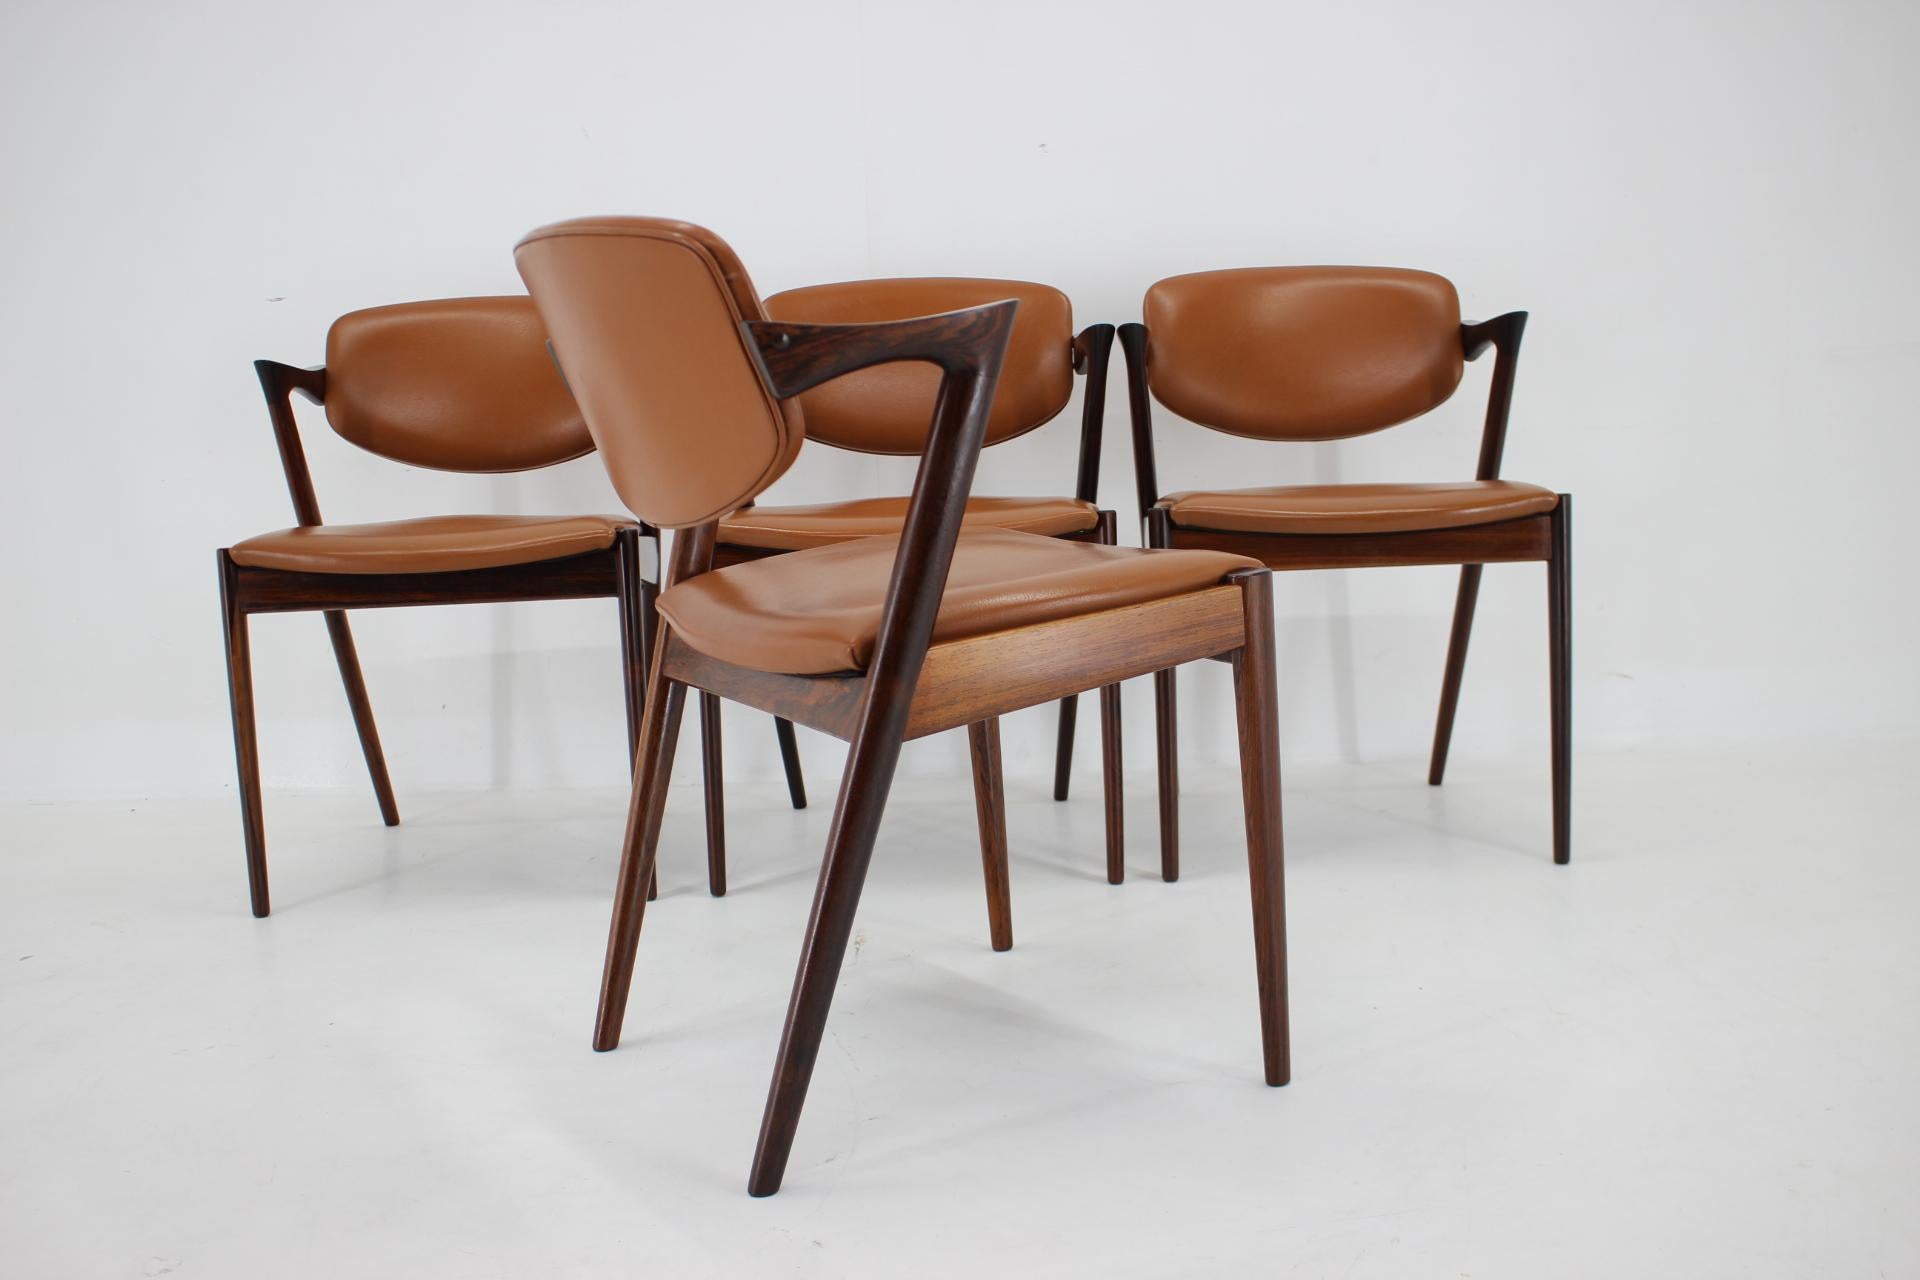 1960s Kai Kristiansen Model 42 Dining Chairs in Palisander, set of 4 For Sale 2